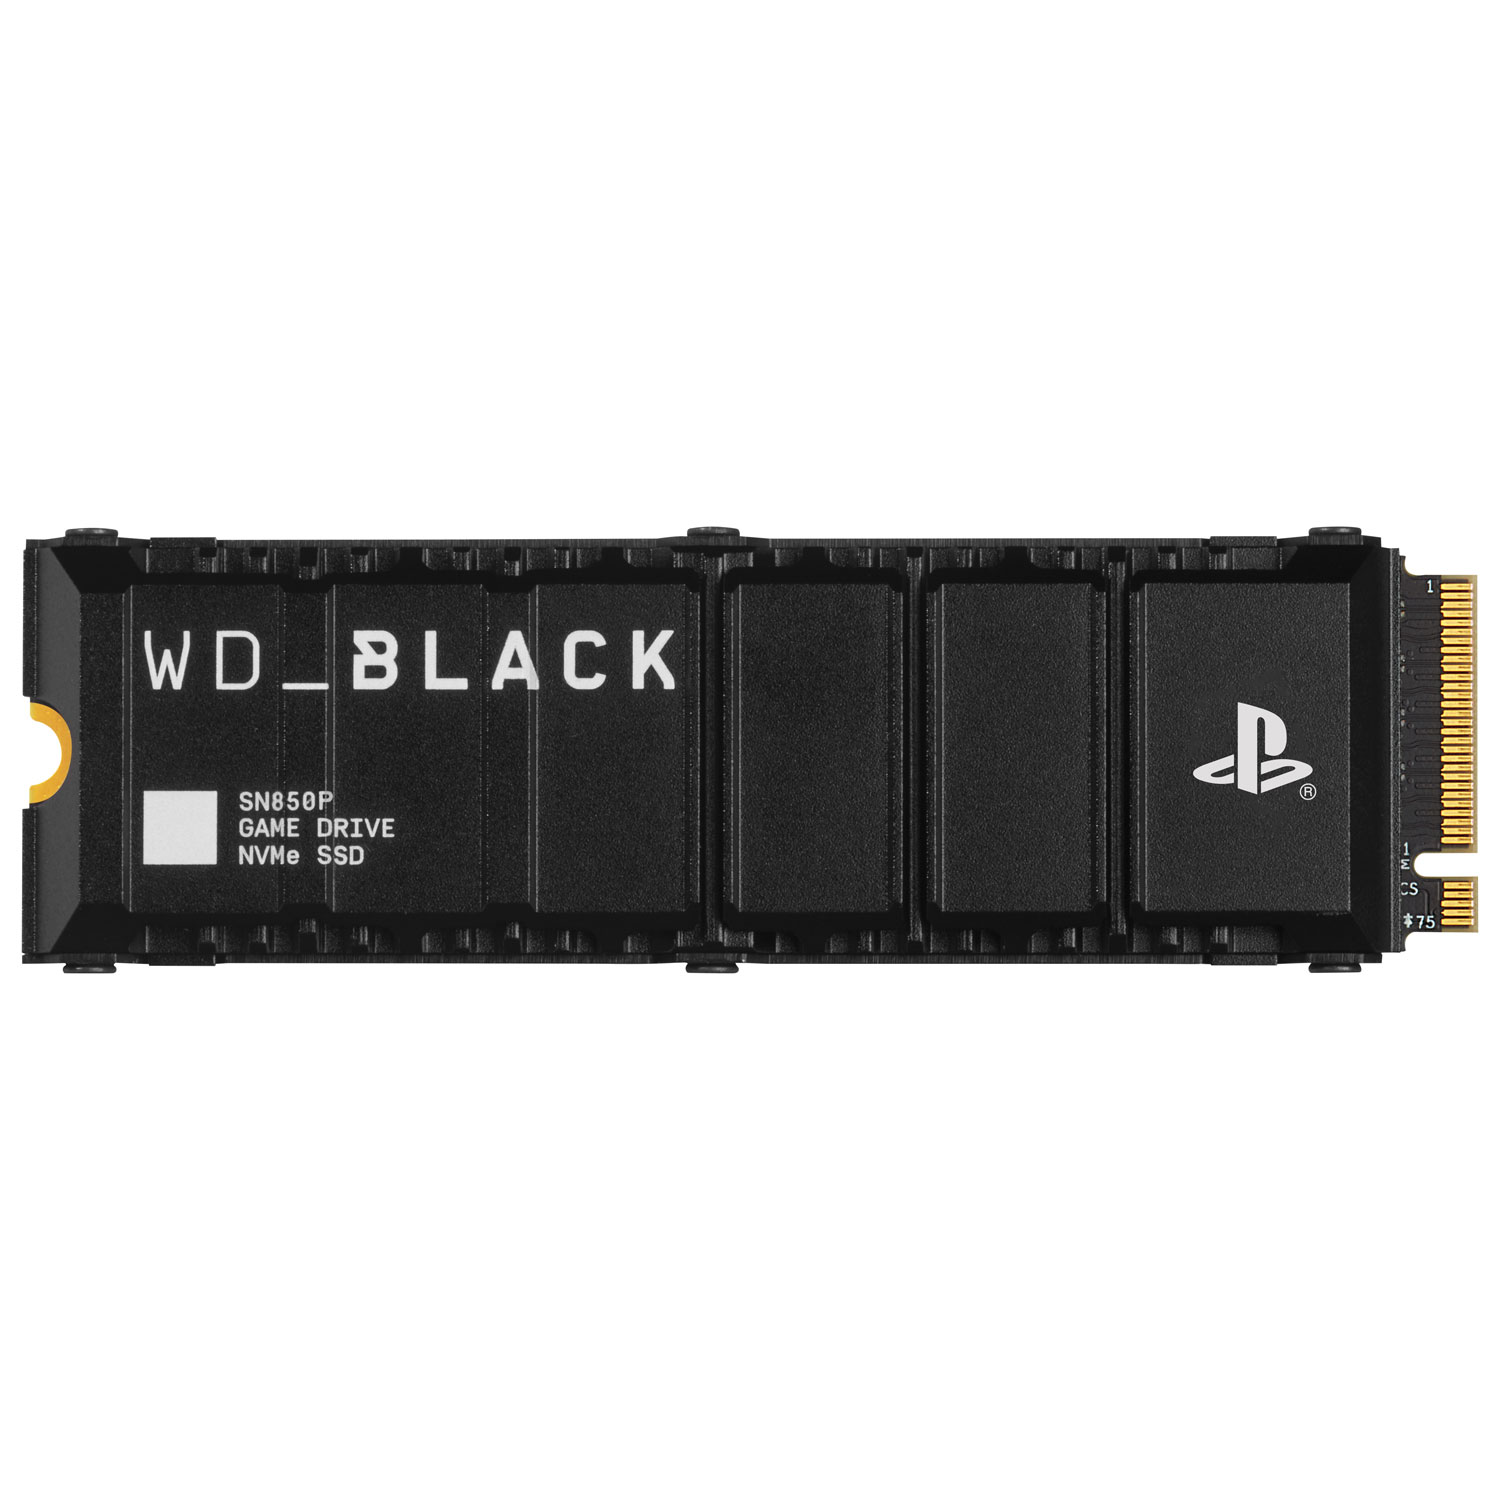 WD_BLACK SN850P 2TB NVMe PCI-e Internal Solid State Drive with